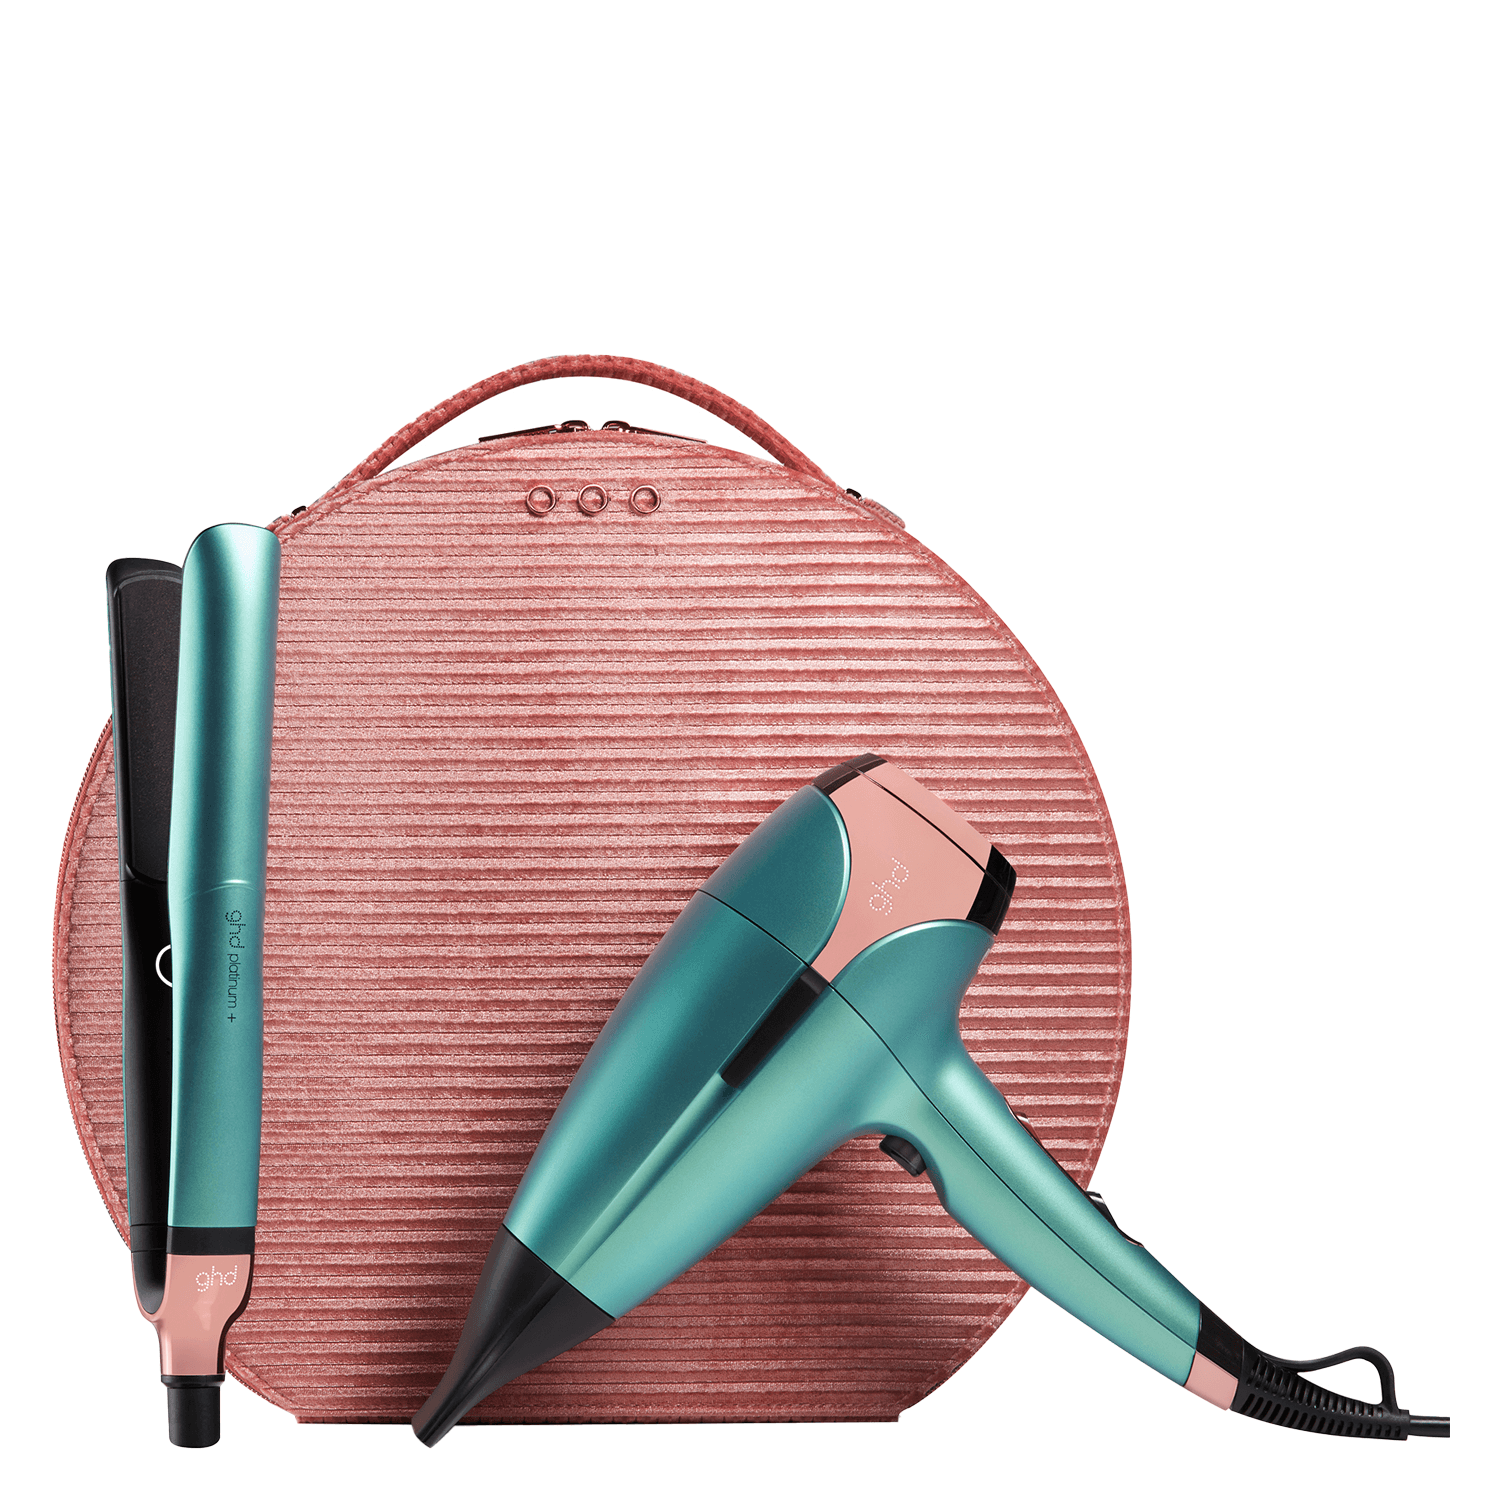 ghd tools - Dreamland Collection Le Deluxe Set